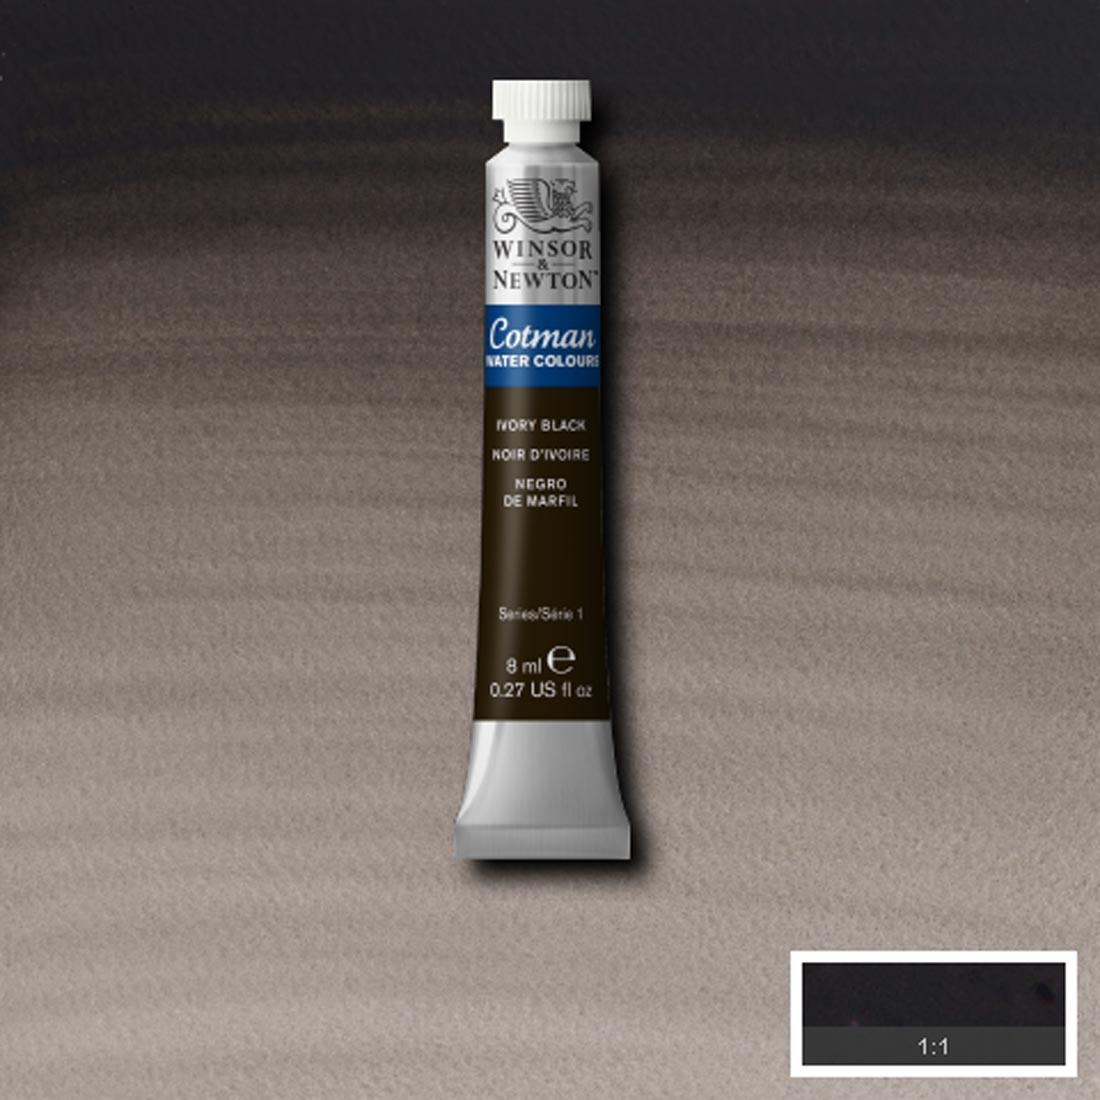 Tube of Ivory Black Winsor and Newton Cotman Water Colour with a paint swatch for the background